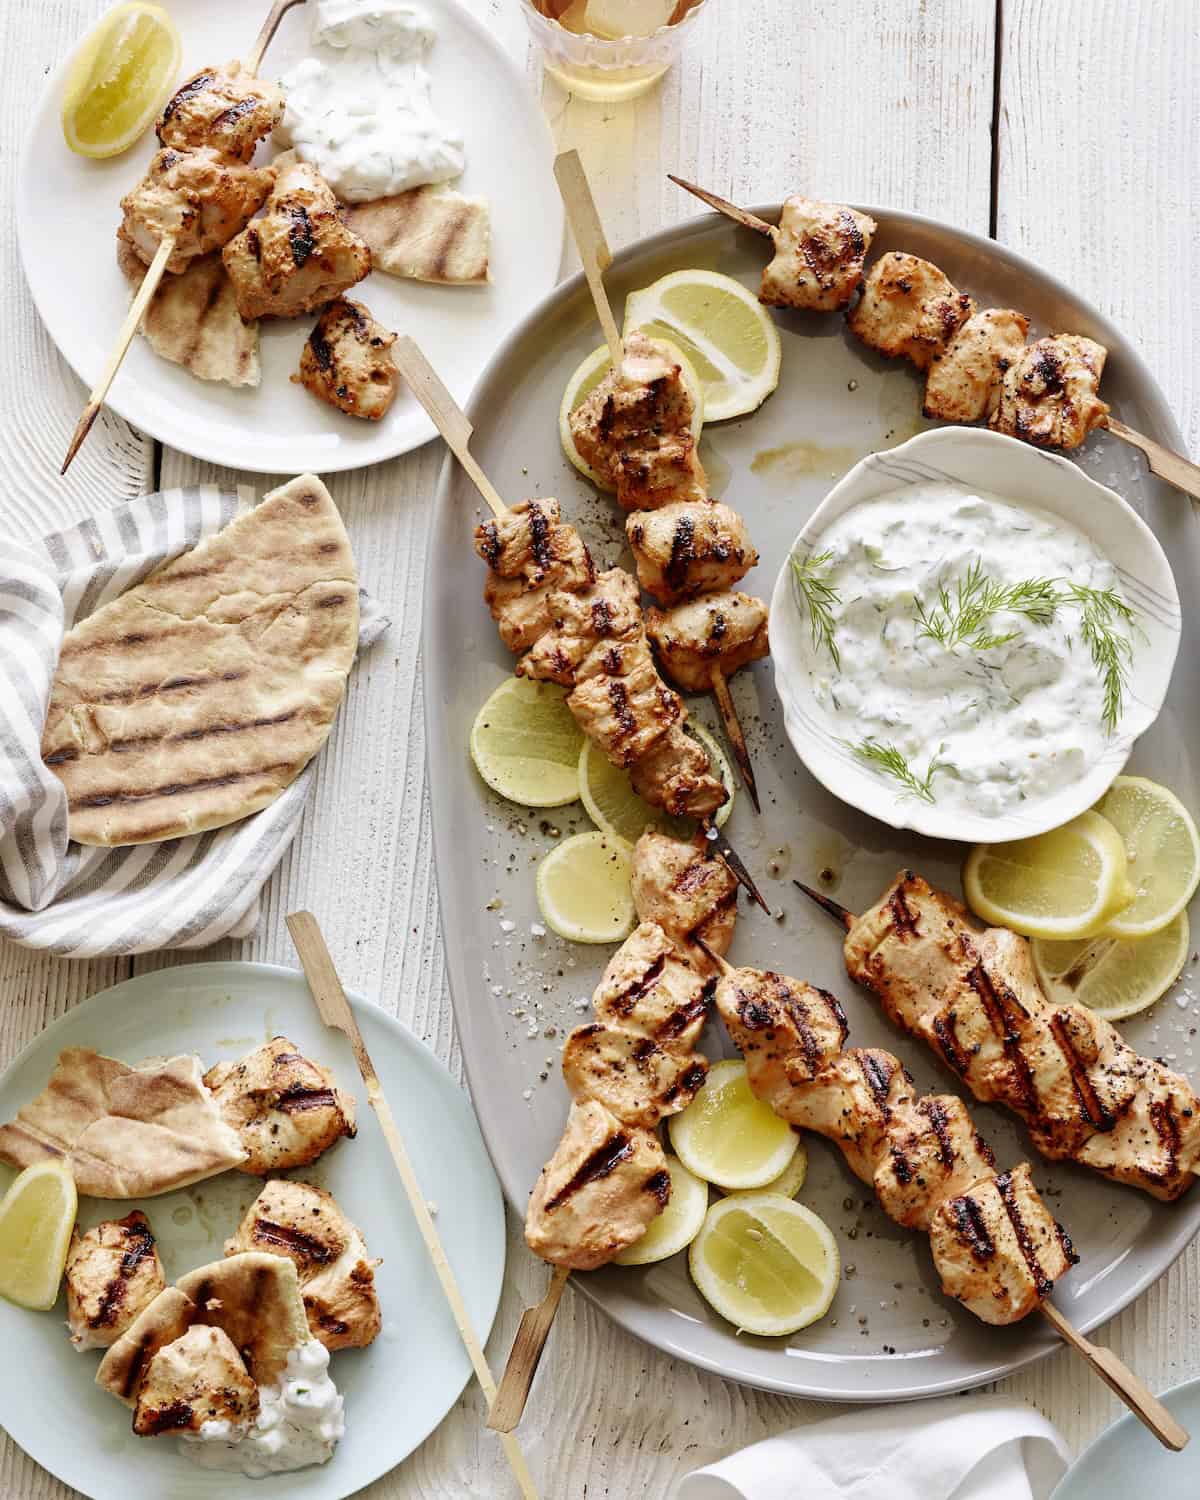 A platter with yogurt marinated chicken skewers along with lemon slices, a bowl with tzatziki and plates on the side with the skewers served with pita.